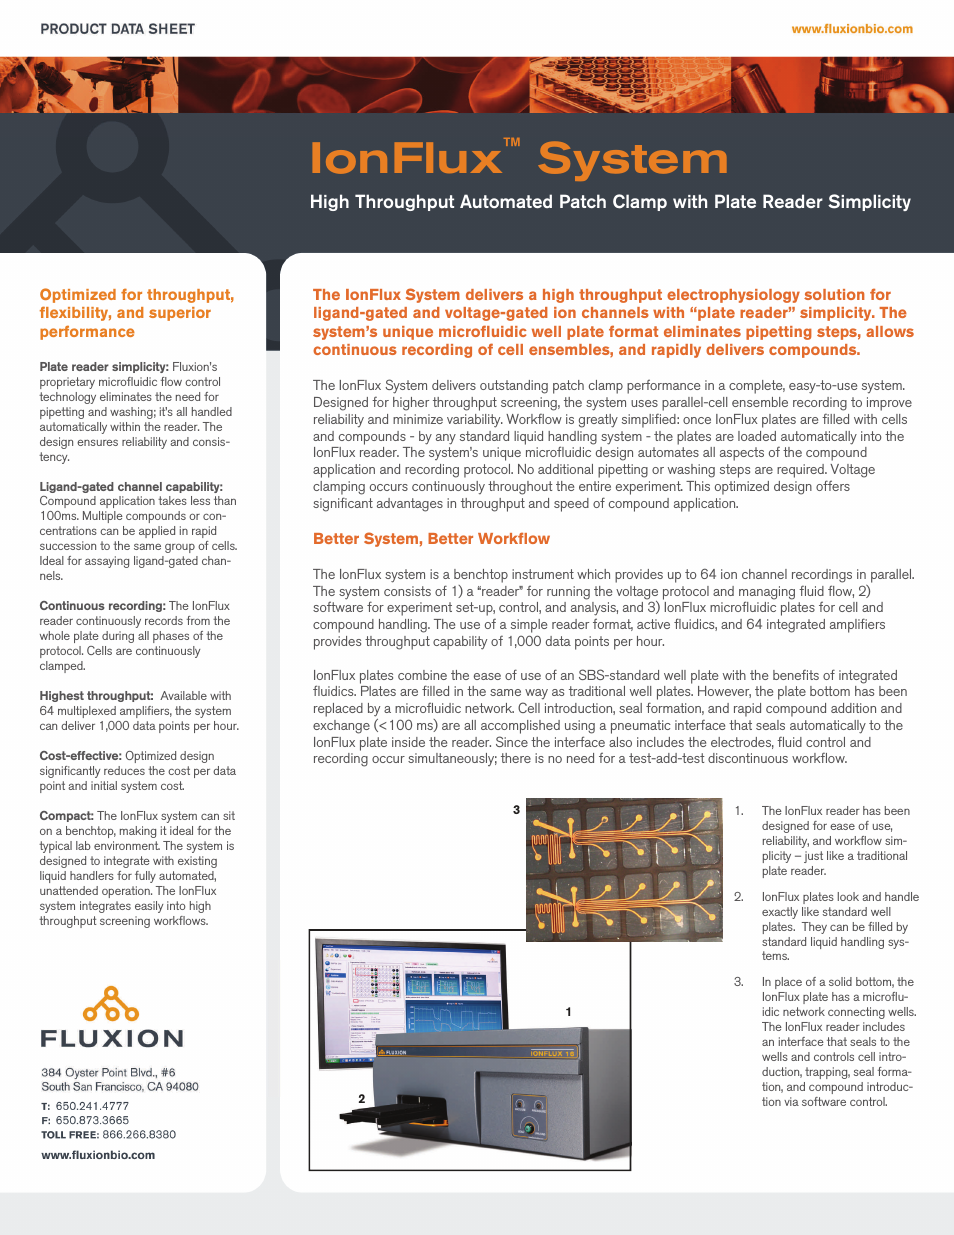 IonFlux System